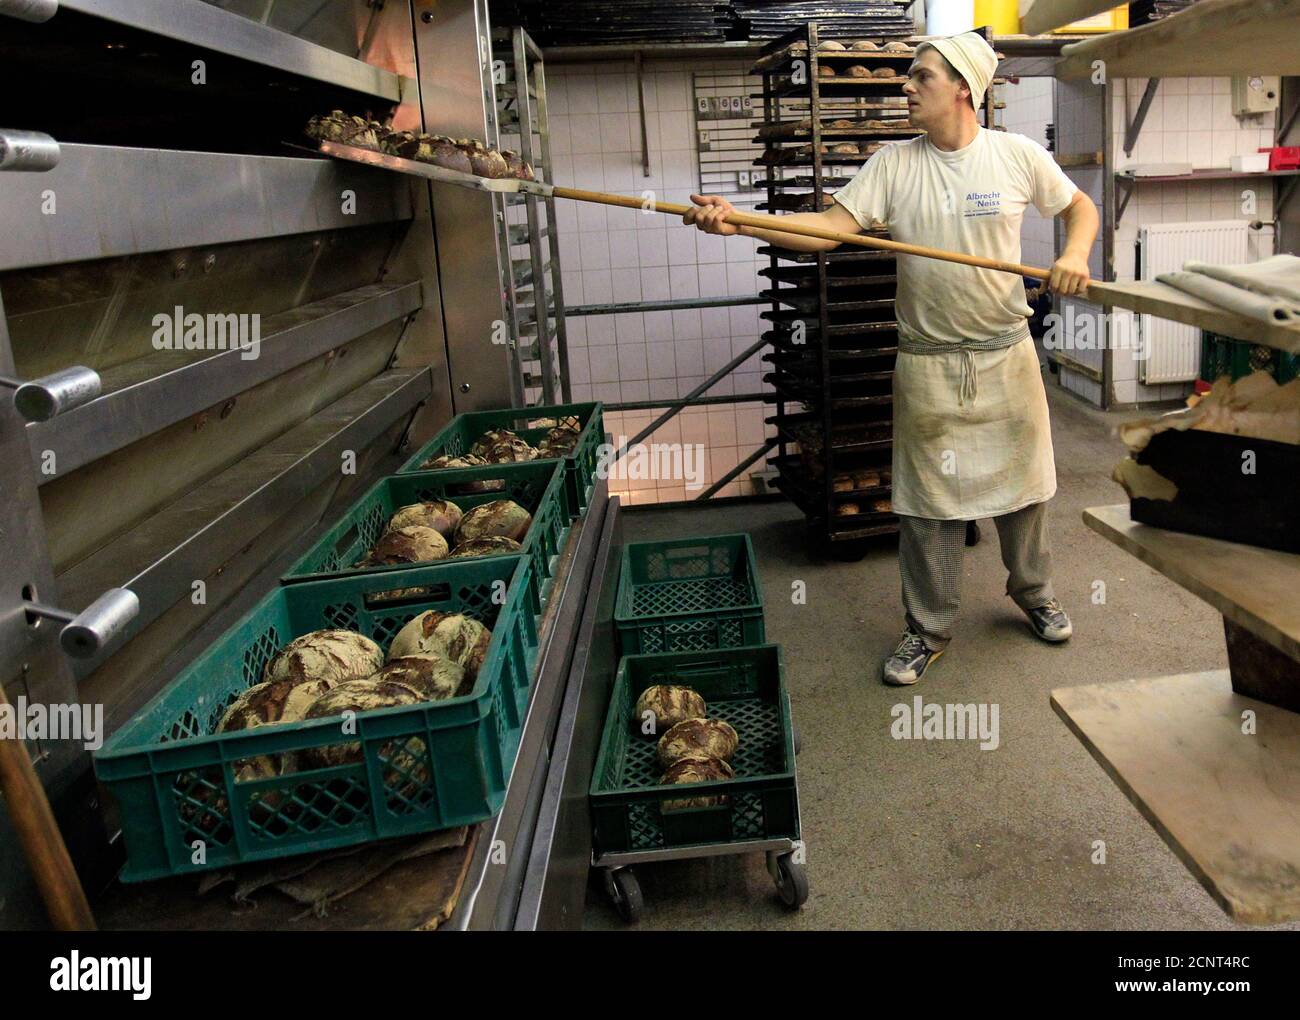 A man takes loaves of bread out of an oven in a bakery in Berlin August 26, 2010.  Germany's 2010 grain crop of all types is likely to fall to around 43.9 million tonnes from 49.7 million tonnes last year, German farmers' association DBV said on Wednesday. German grain has suffered from an early summer heatwave followed by heavy harvest-time rain, it said.  REUTERS/Thomas Peter (GERMANY - Tags: BUSINESS FOOD AGRICULTURE) Stock Photo